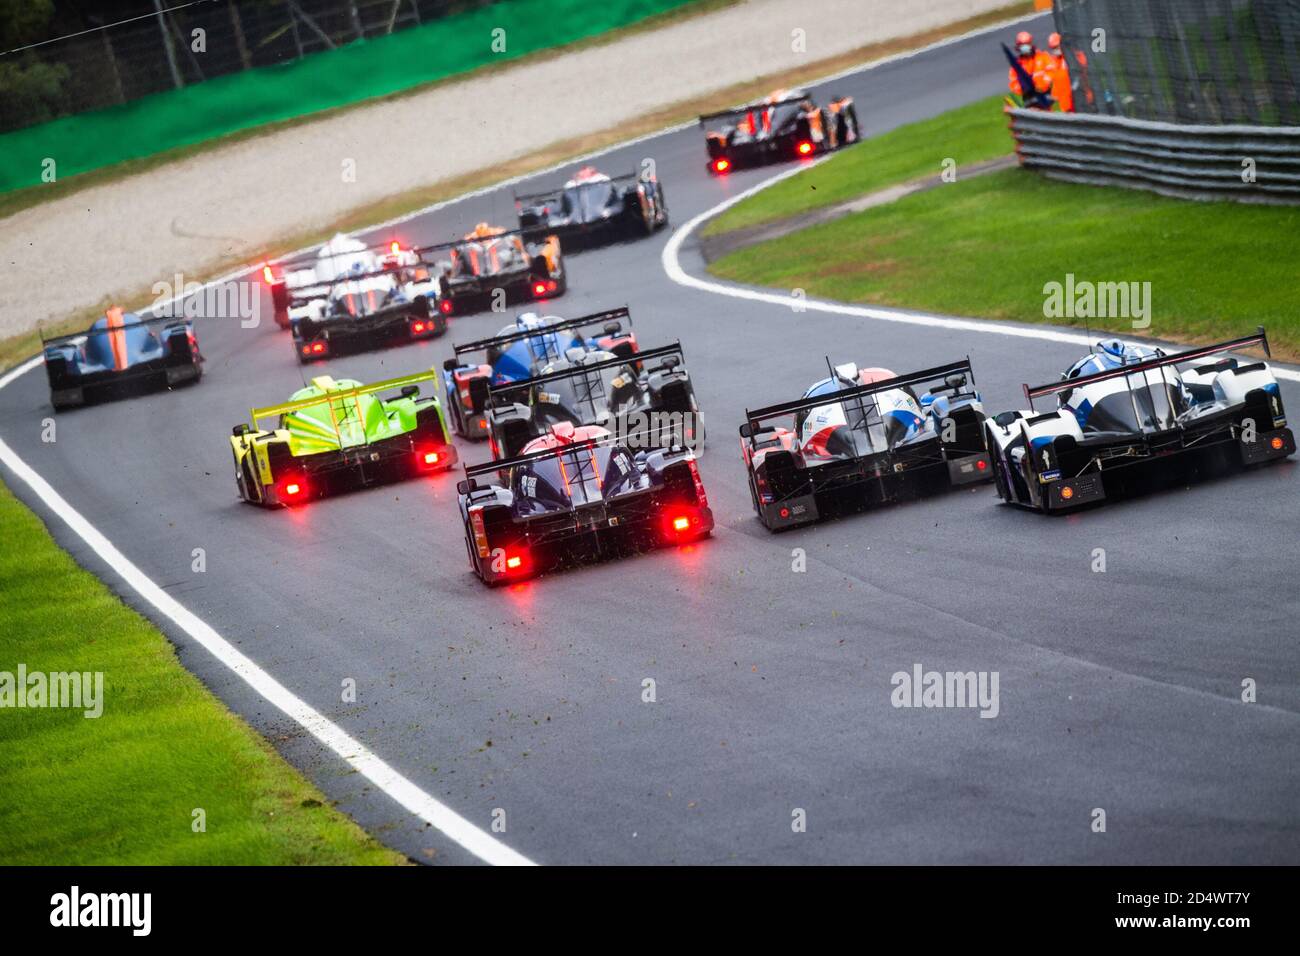 Monza, Italy. 11th October, 2020. start of the race, depart, during the 2020 4 Hours of Monza, 4th round of the 2020 European Le Mans Series, from October 9 to 11, 2020 on the Autodromo Nazionale di Monza, Italy - Photo Germain Hazard / DPPI Credit: LM/DPPI/Germain Hazard/Alamy Live News Stock Photo